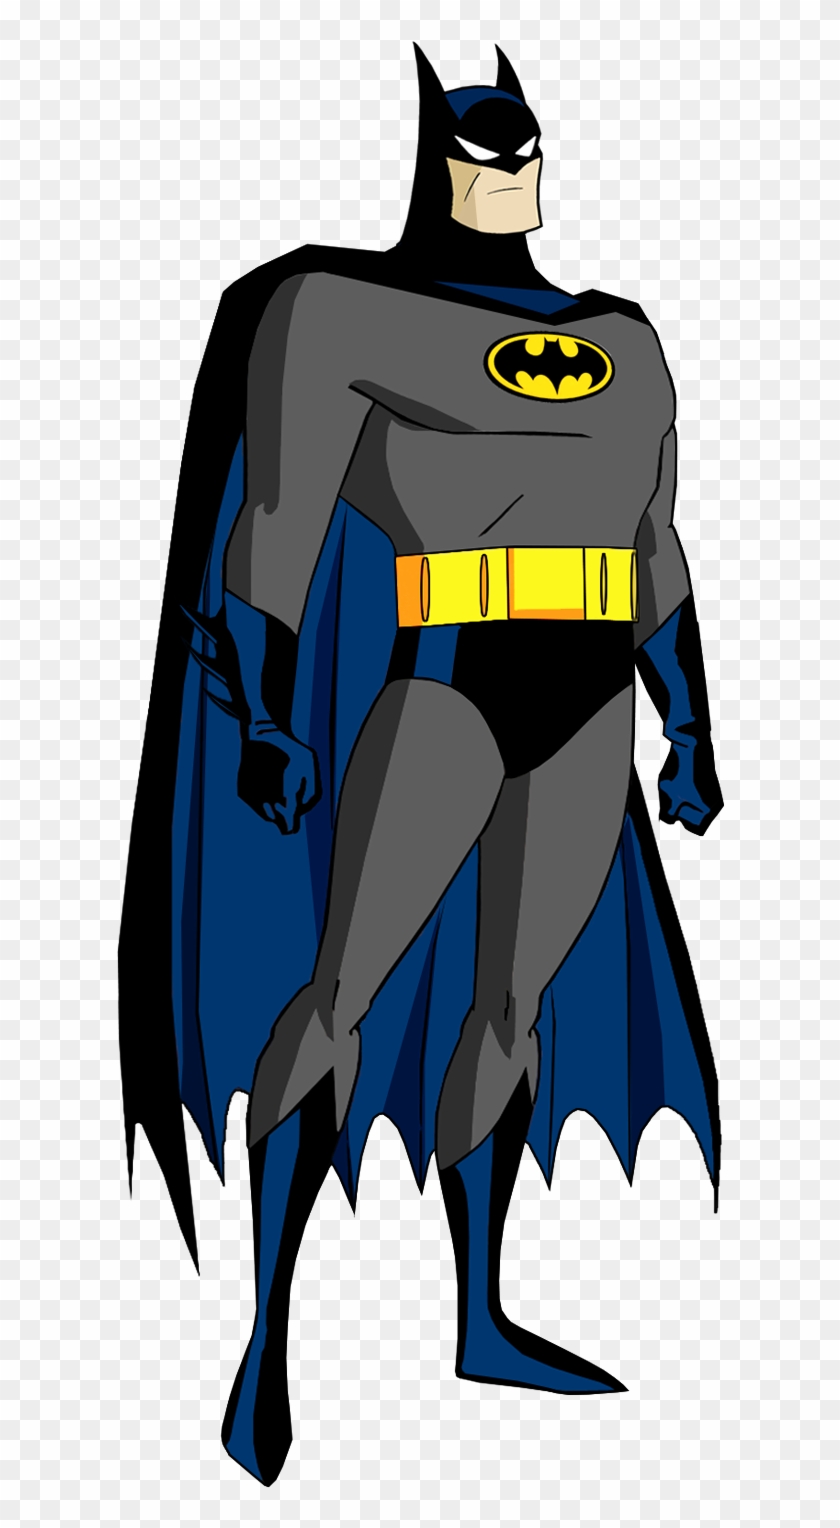 Batman From Batman The Animated Series By Alexbadass - Batman The Animated  Series Batsuit - Free Transparent PNG Clipart Images Download